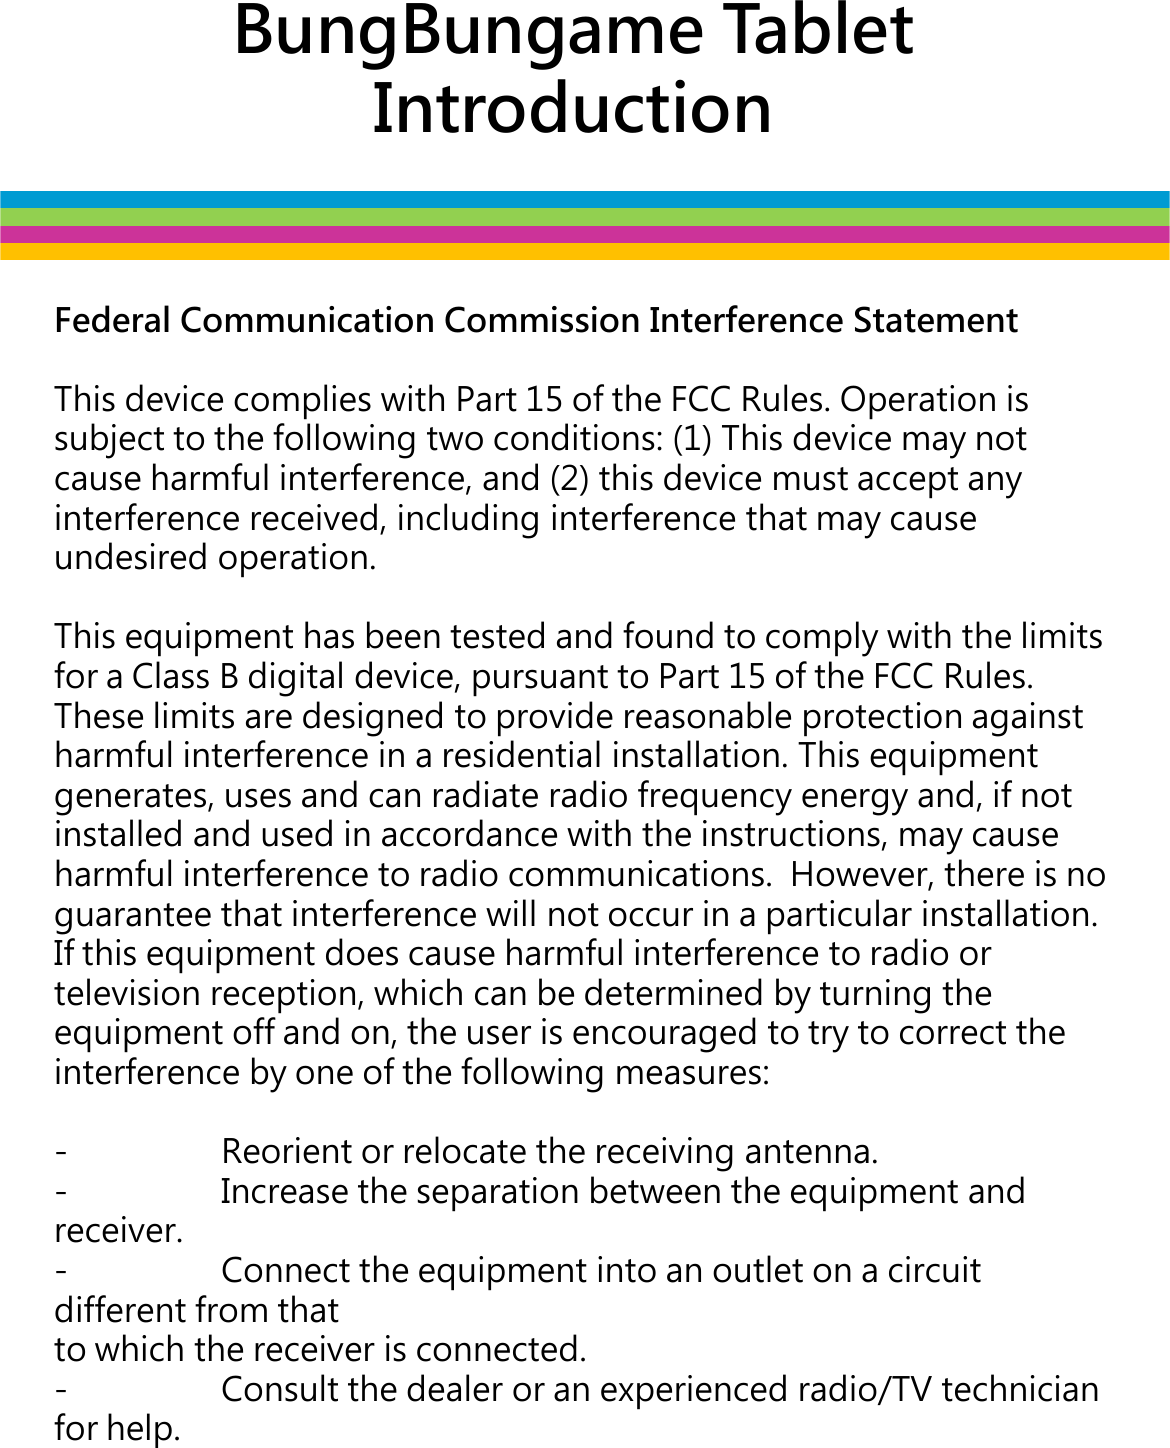 BungBungame Tablet IntroductionFederal Communication Commission Interference StatementThis device complies with Part 15 of the FCC Rules. Operation is subject to the following two conditions: (1) This device may not cause harmful interference, and (2) this device must accept any interference received, including interference that may cause interference received, including interference that may cause undesired operation.This equipment has been tested and found to comply with the limits for a Class B digital device, pursuant to Part 15 of the FCC Rules.  These limits are designed to provide reasonable protection against harmful interference in a residential installation. This equipment generates, uses and can radiate radio frequency energy and, if not installed and used in accordance with the instructions, may cause harmful interference to radio communications.  However, there is no guarantee that interference will not occur in a particular installation.  If this equipment does cause harmful interference to radio or television reception, which can be determined by turning the equipment off and on, the user is encouraged to try to correct the interference by one of the following measures:- Reorient or relocate the receiving antenna.- Increase the separation between the equipment and receiver.- Connect the equipment into an outlet on a circuit different from thatto which the receiver is connected.- Consult the dealer or an experienced radio/TV technician for help.